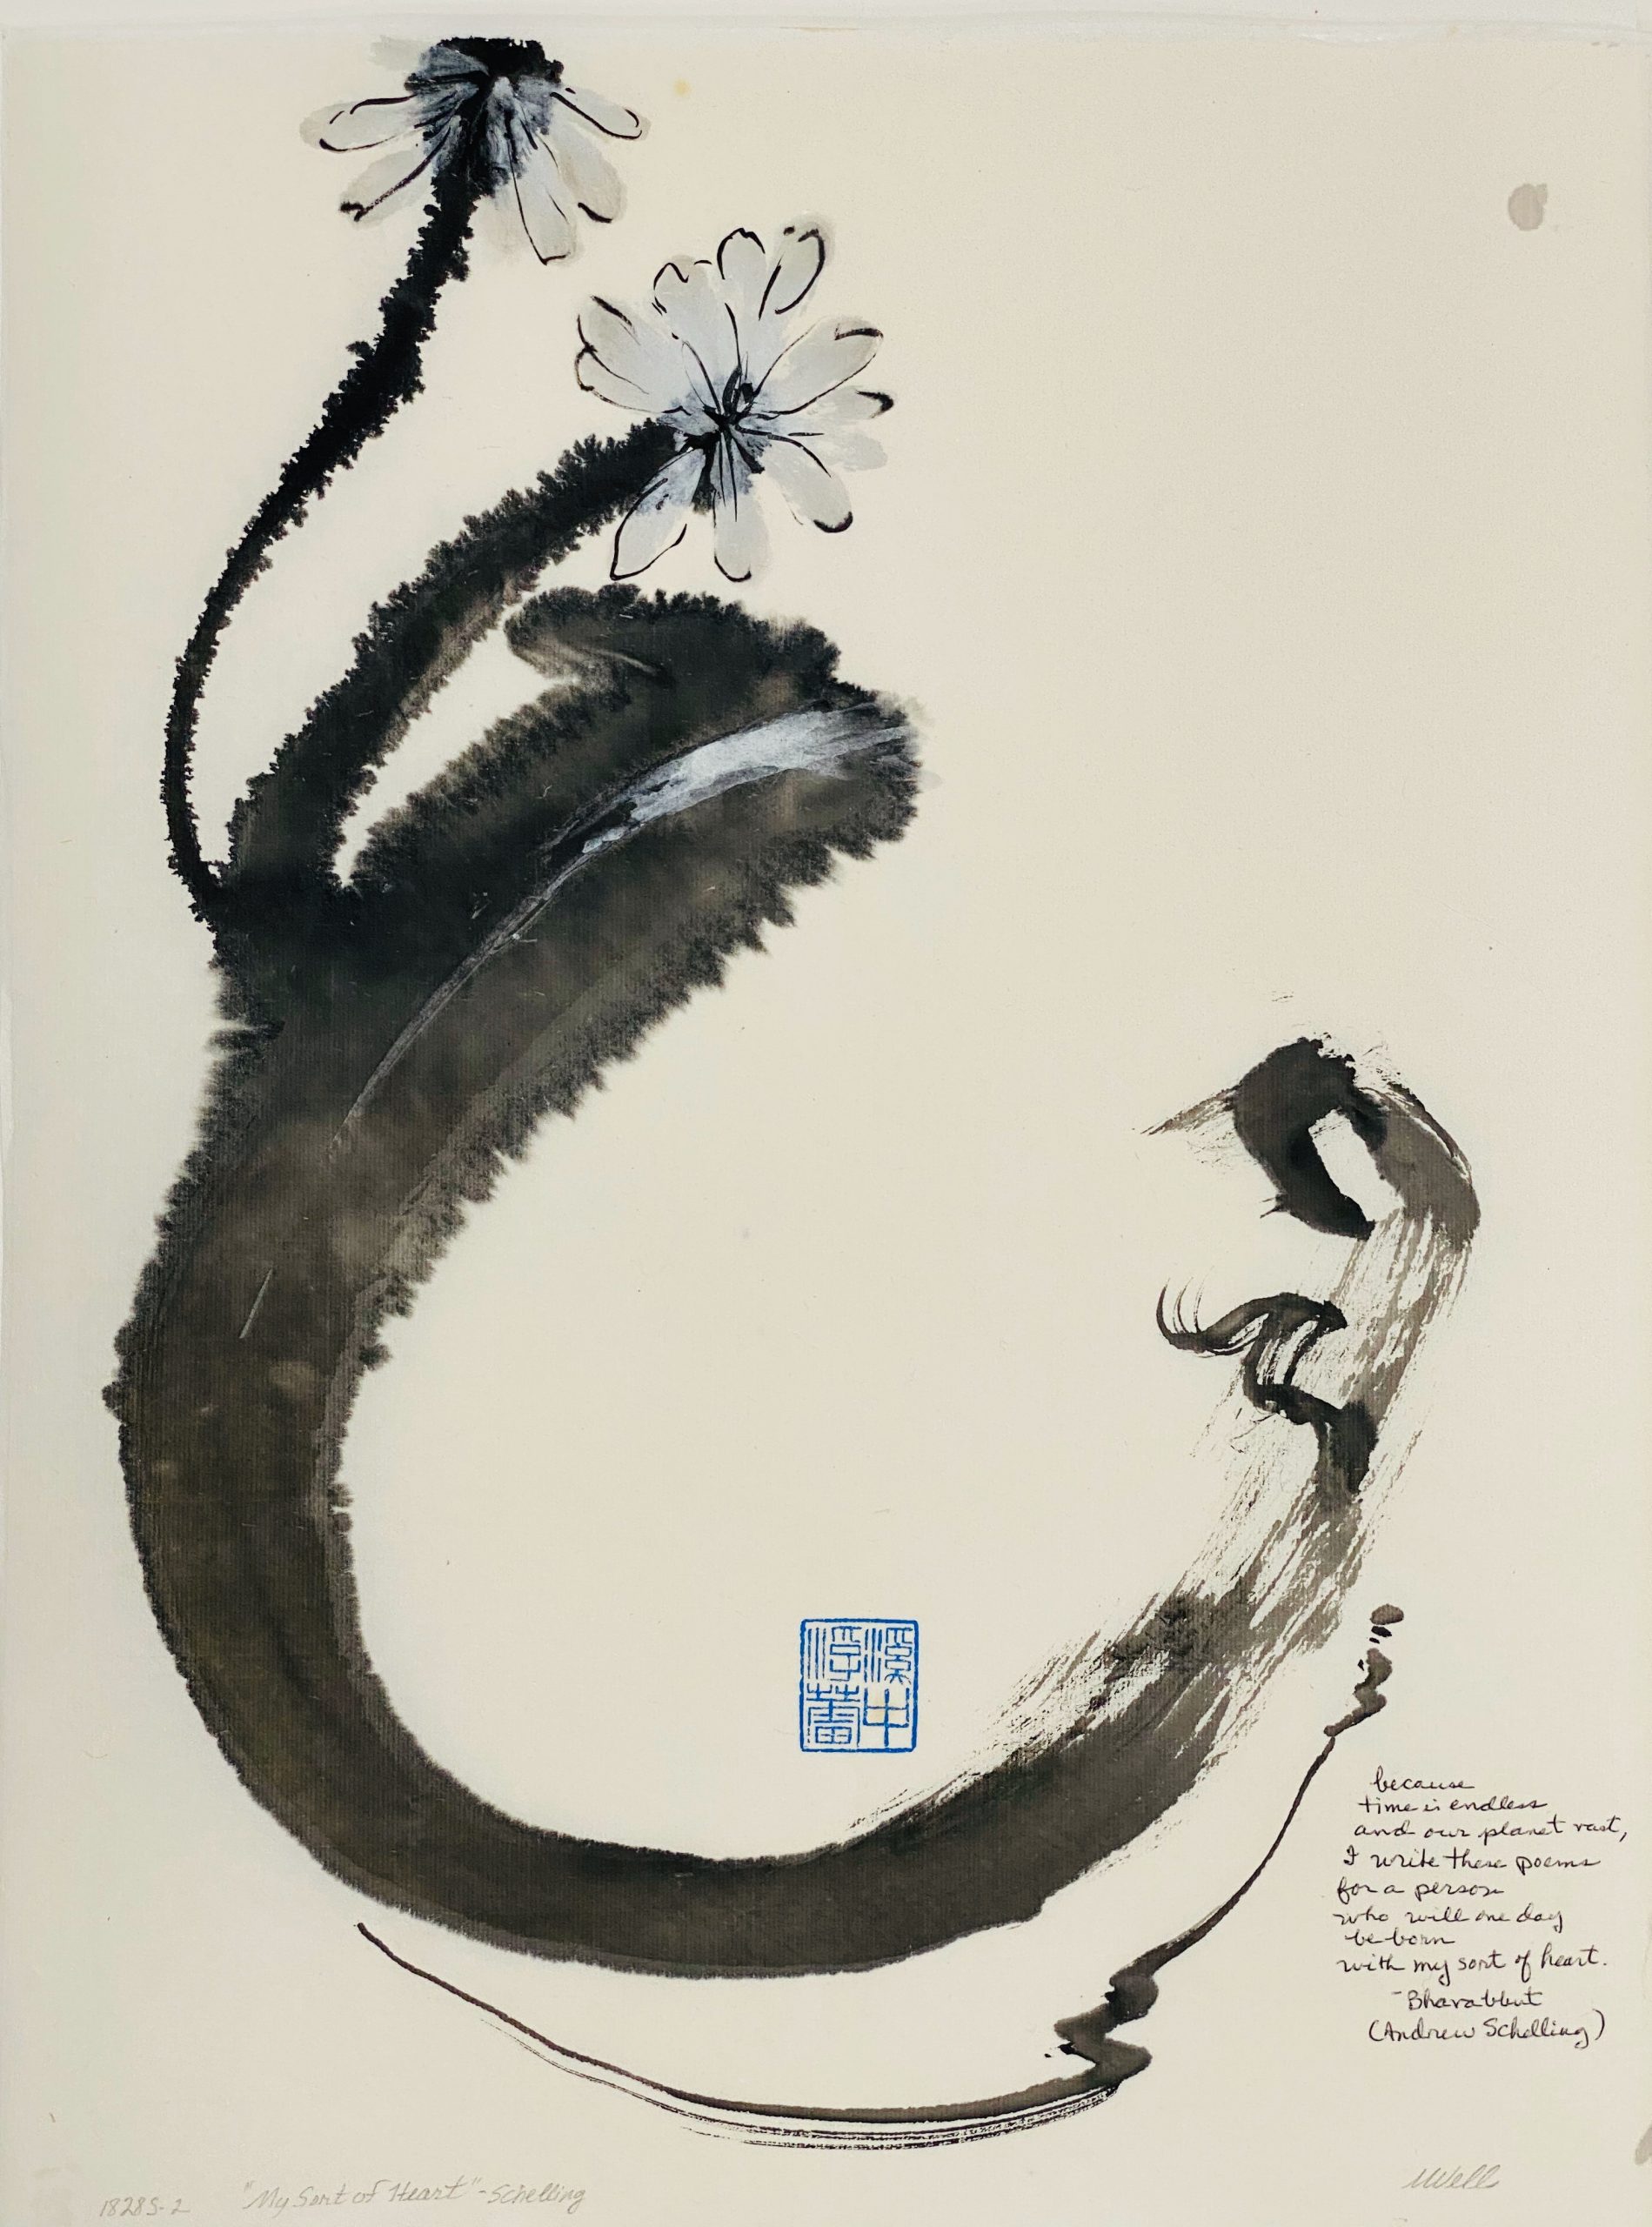 Abstract sumi e to illustrate an Indian Love Poem